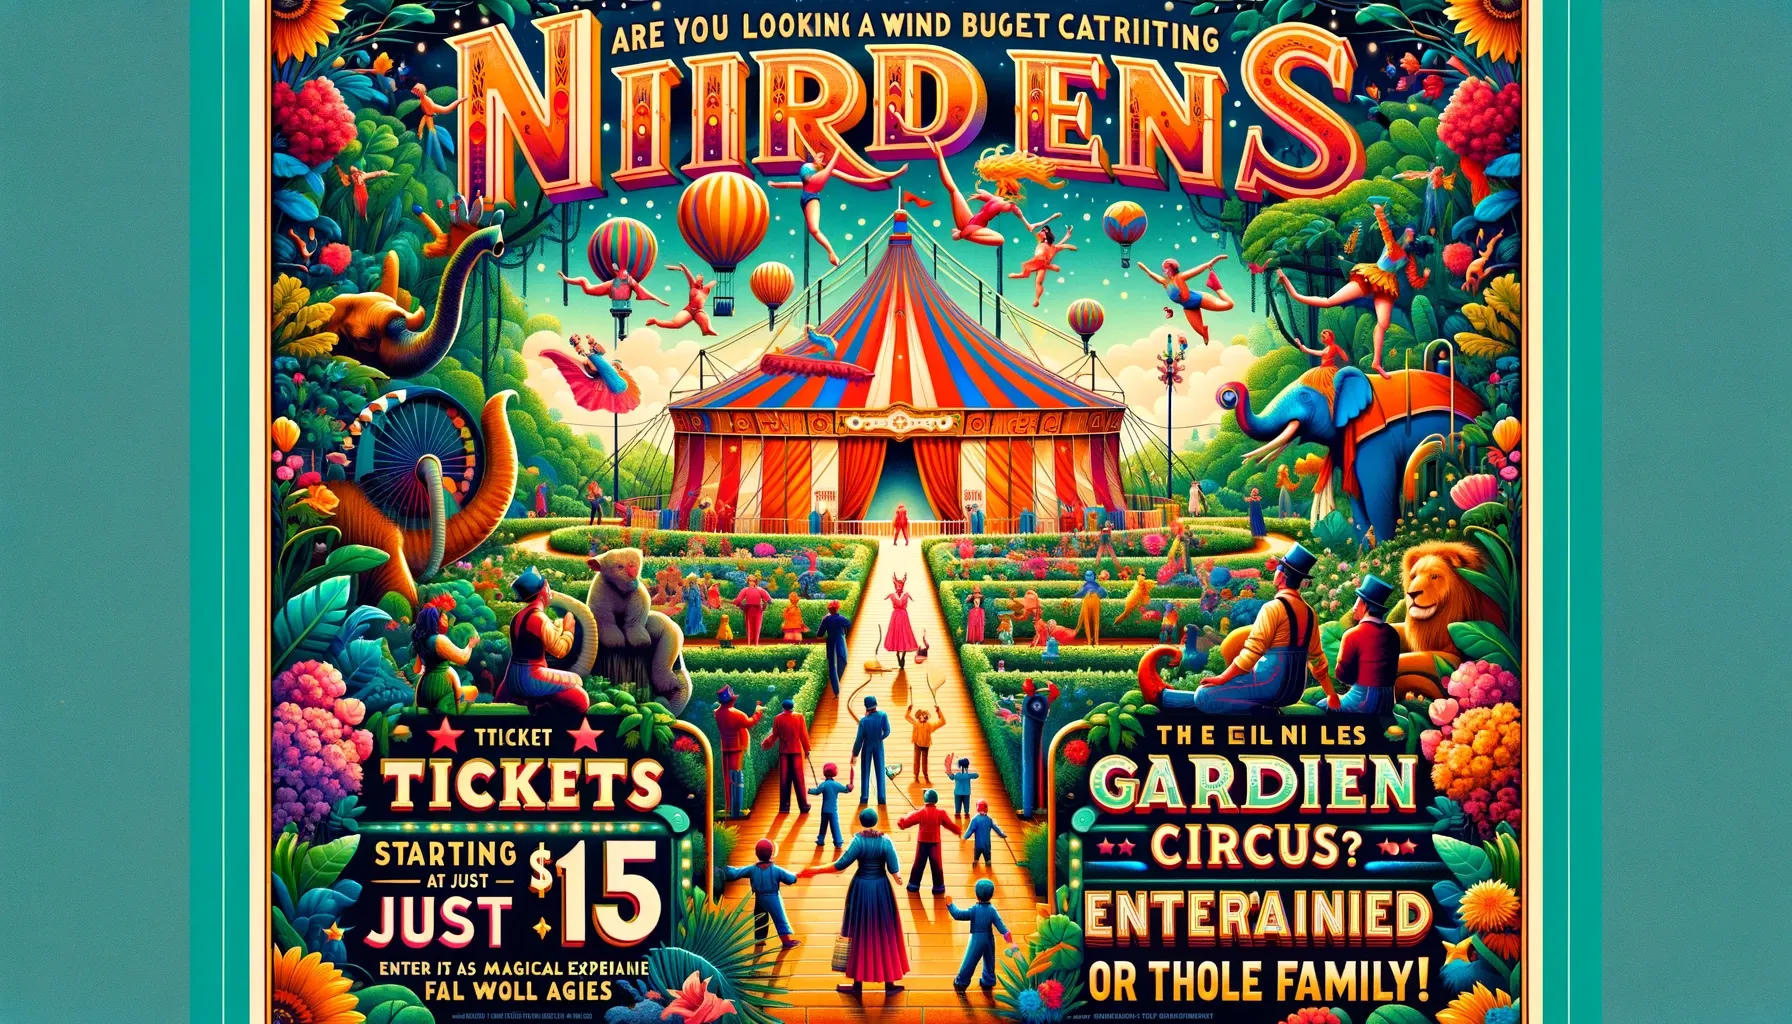 Niles Garden Circus Tickets: Starting Price From $15